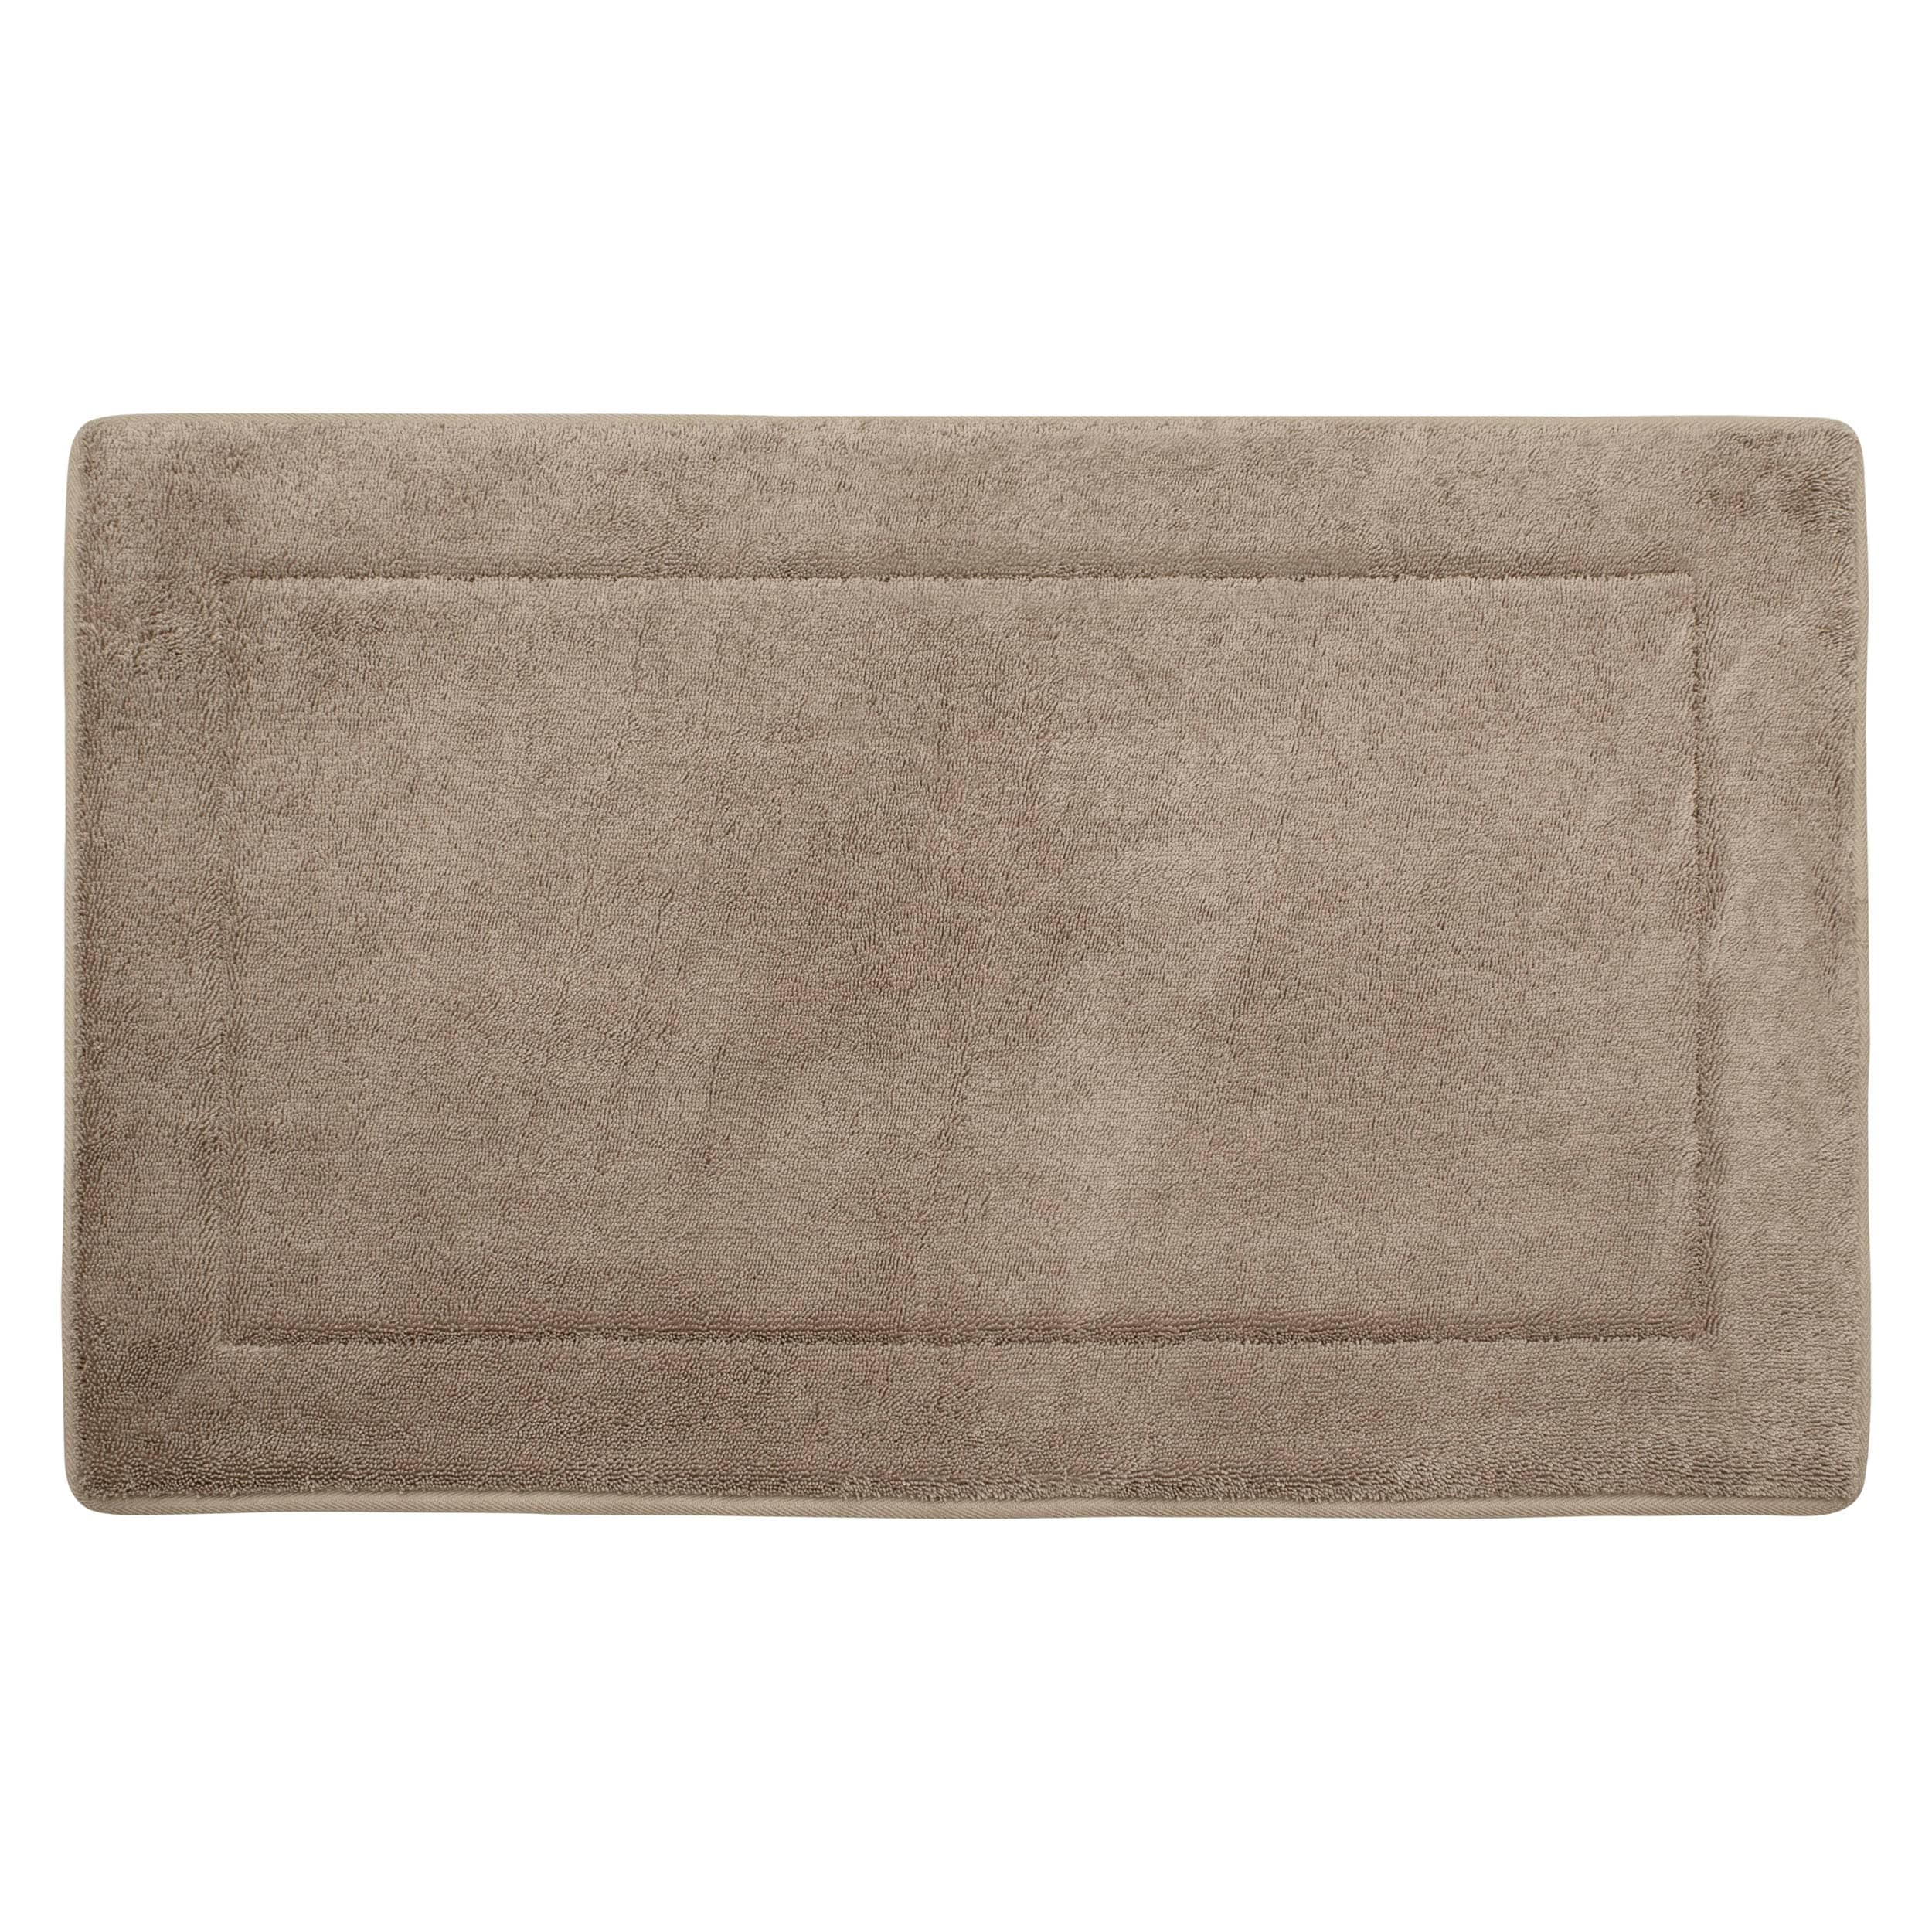 https://ak1.ostkcdn.com/images/products/is/images/direct/6be5d74f6b6660418b9587748bed4a58ae529712/Oliver-Brown-Terry-Memory-Foam-Bath-Mat.jpg